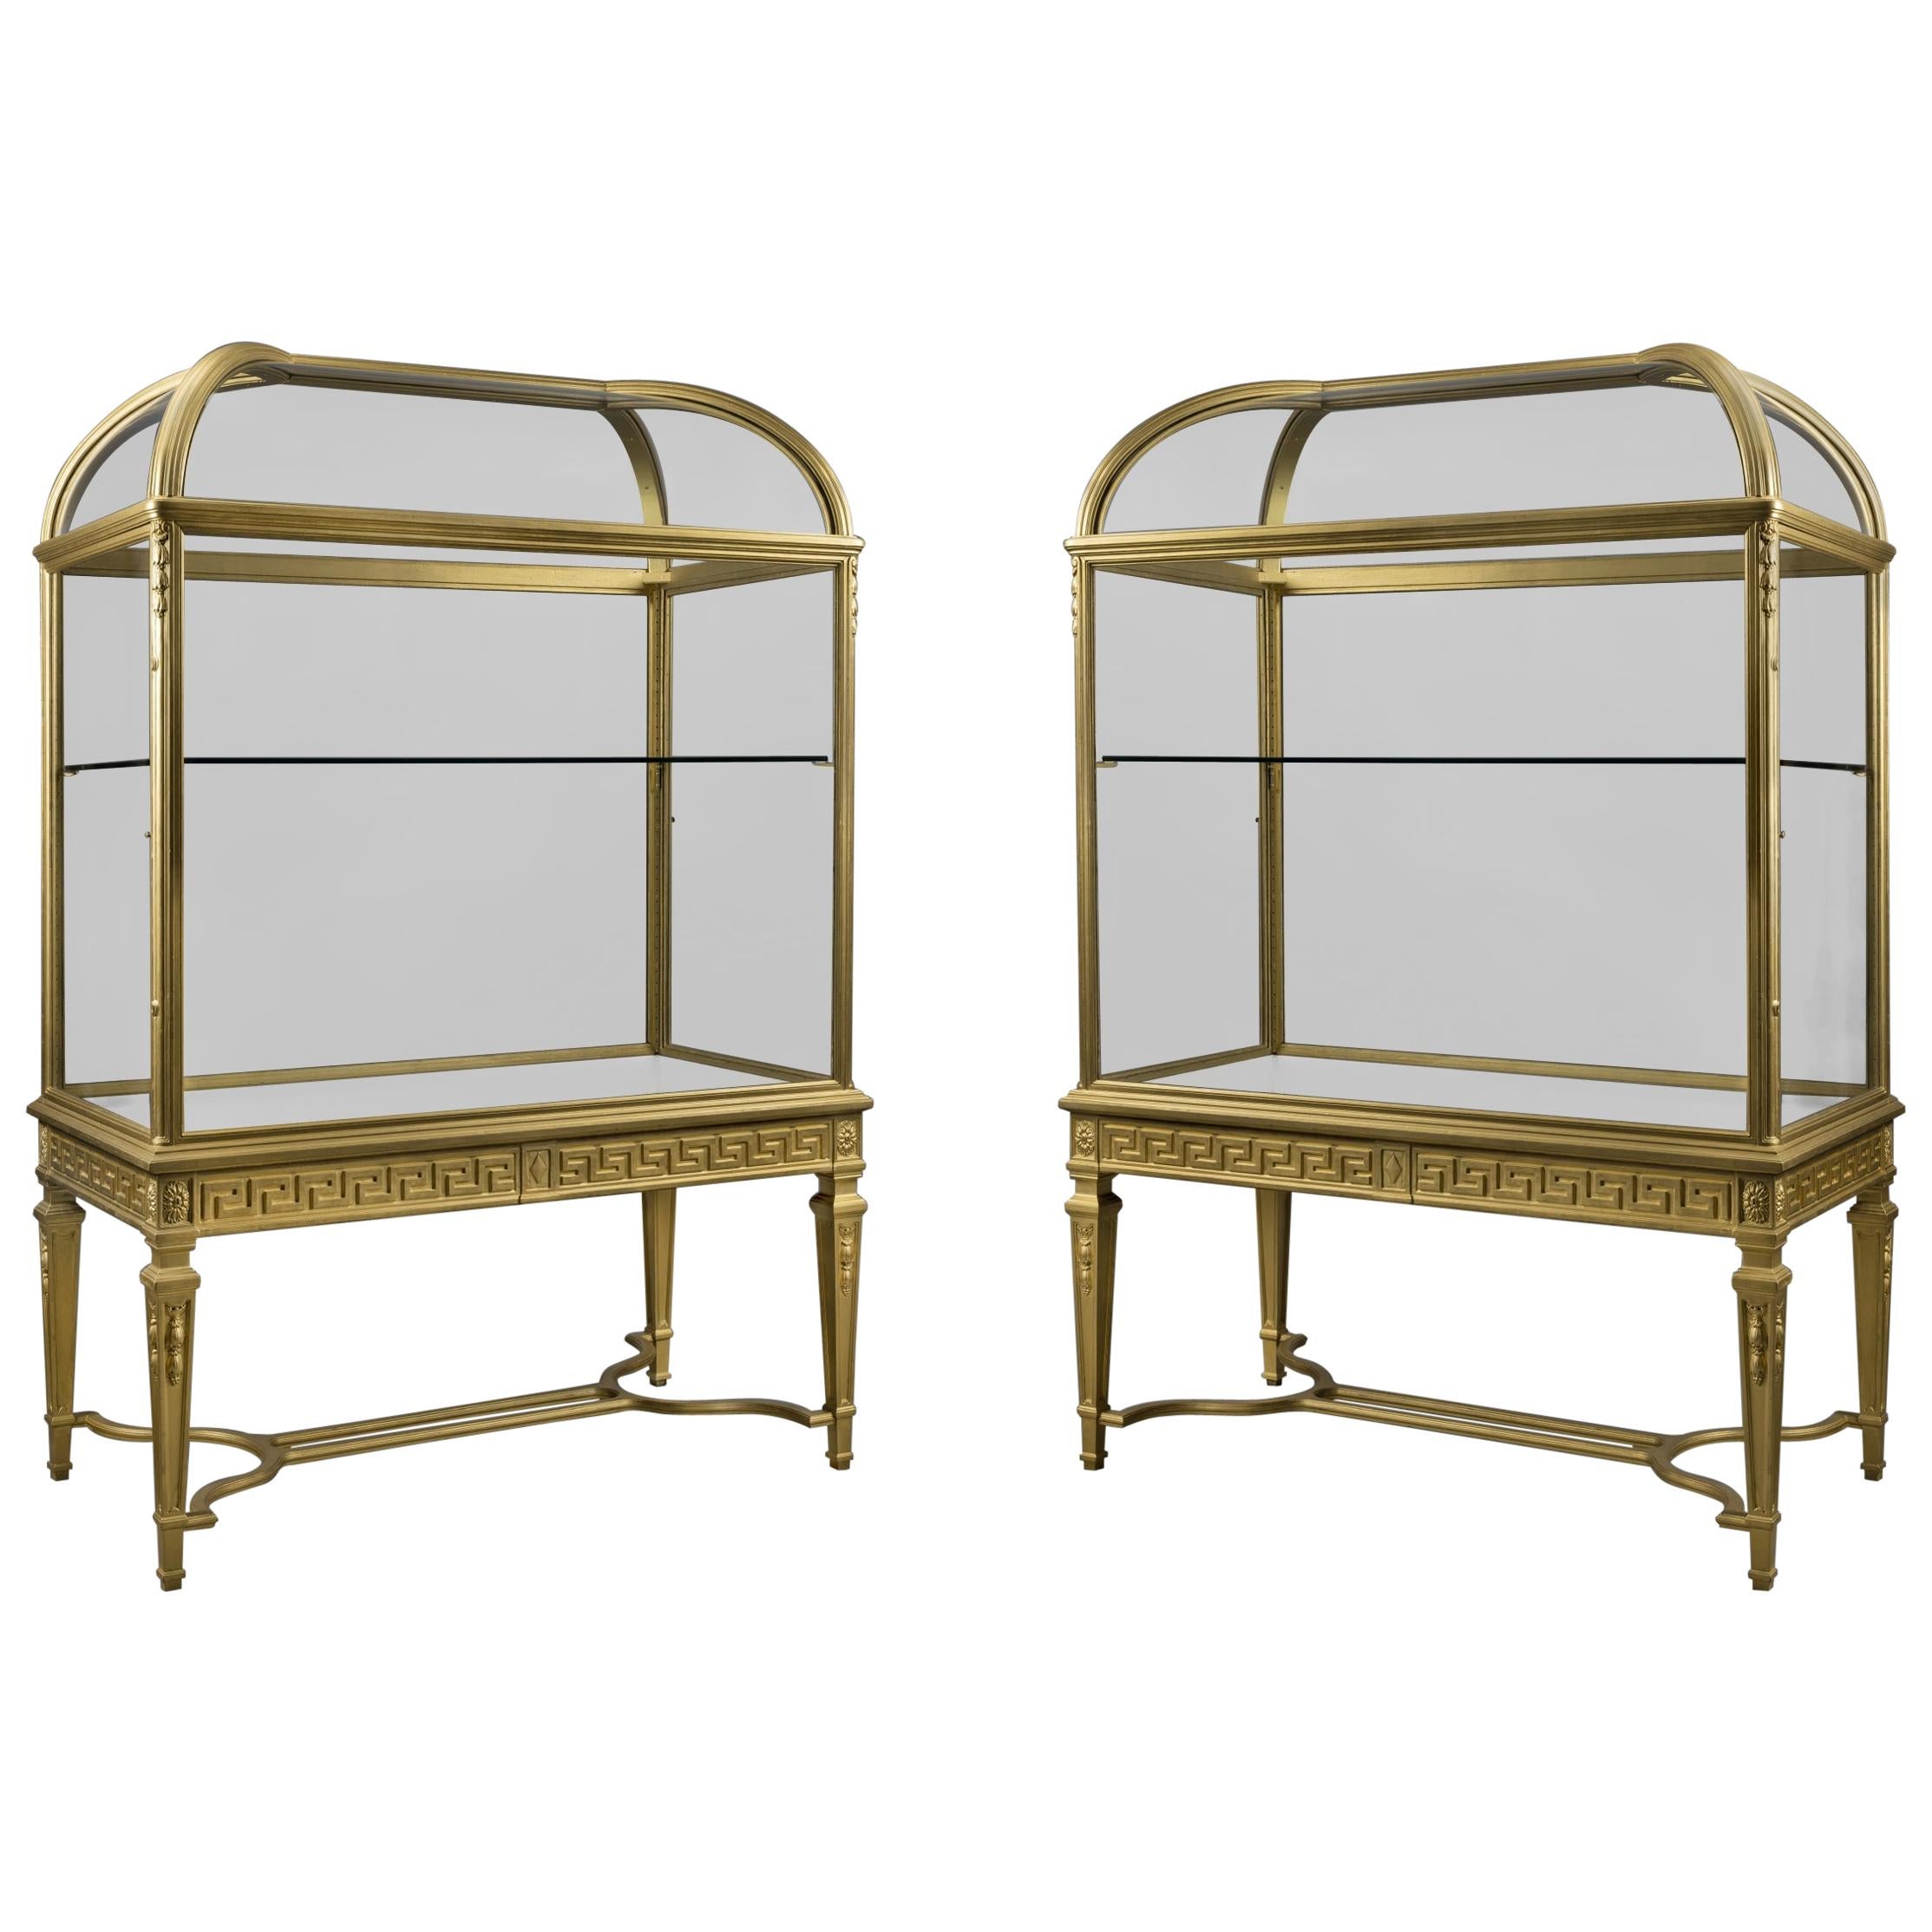 Pair of Giltwood Domed Top Display Cabinets, circa 1900 For Sale